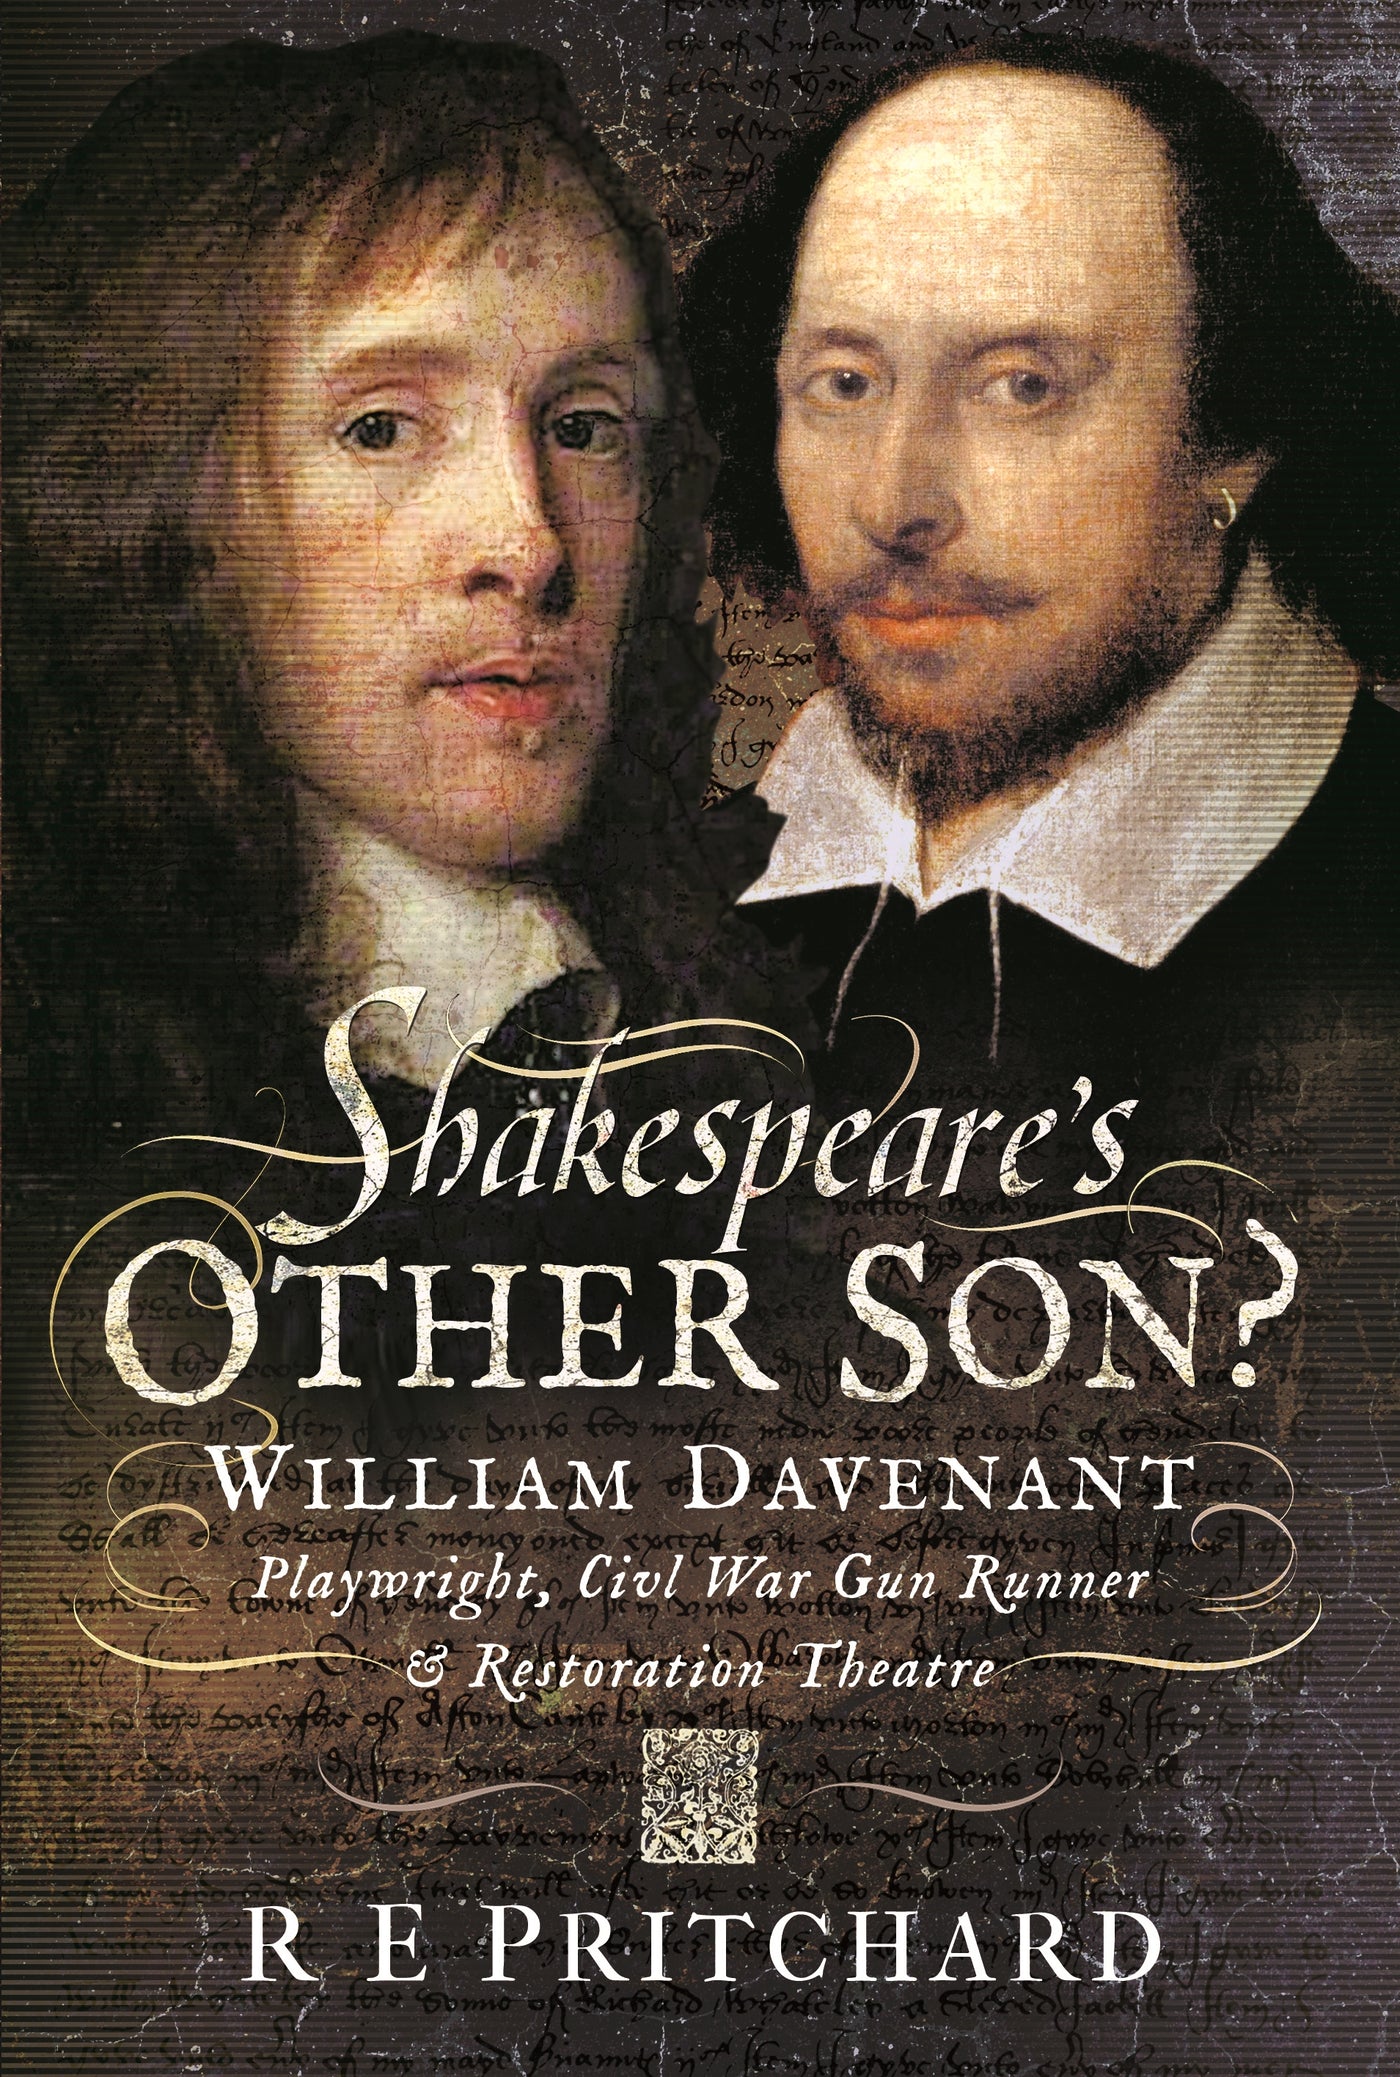 Shakespeare's Other Son?